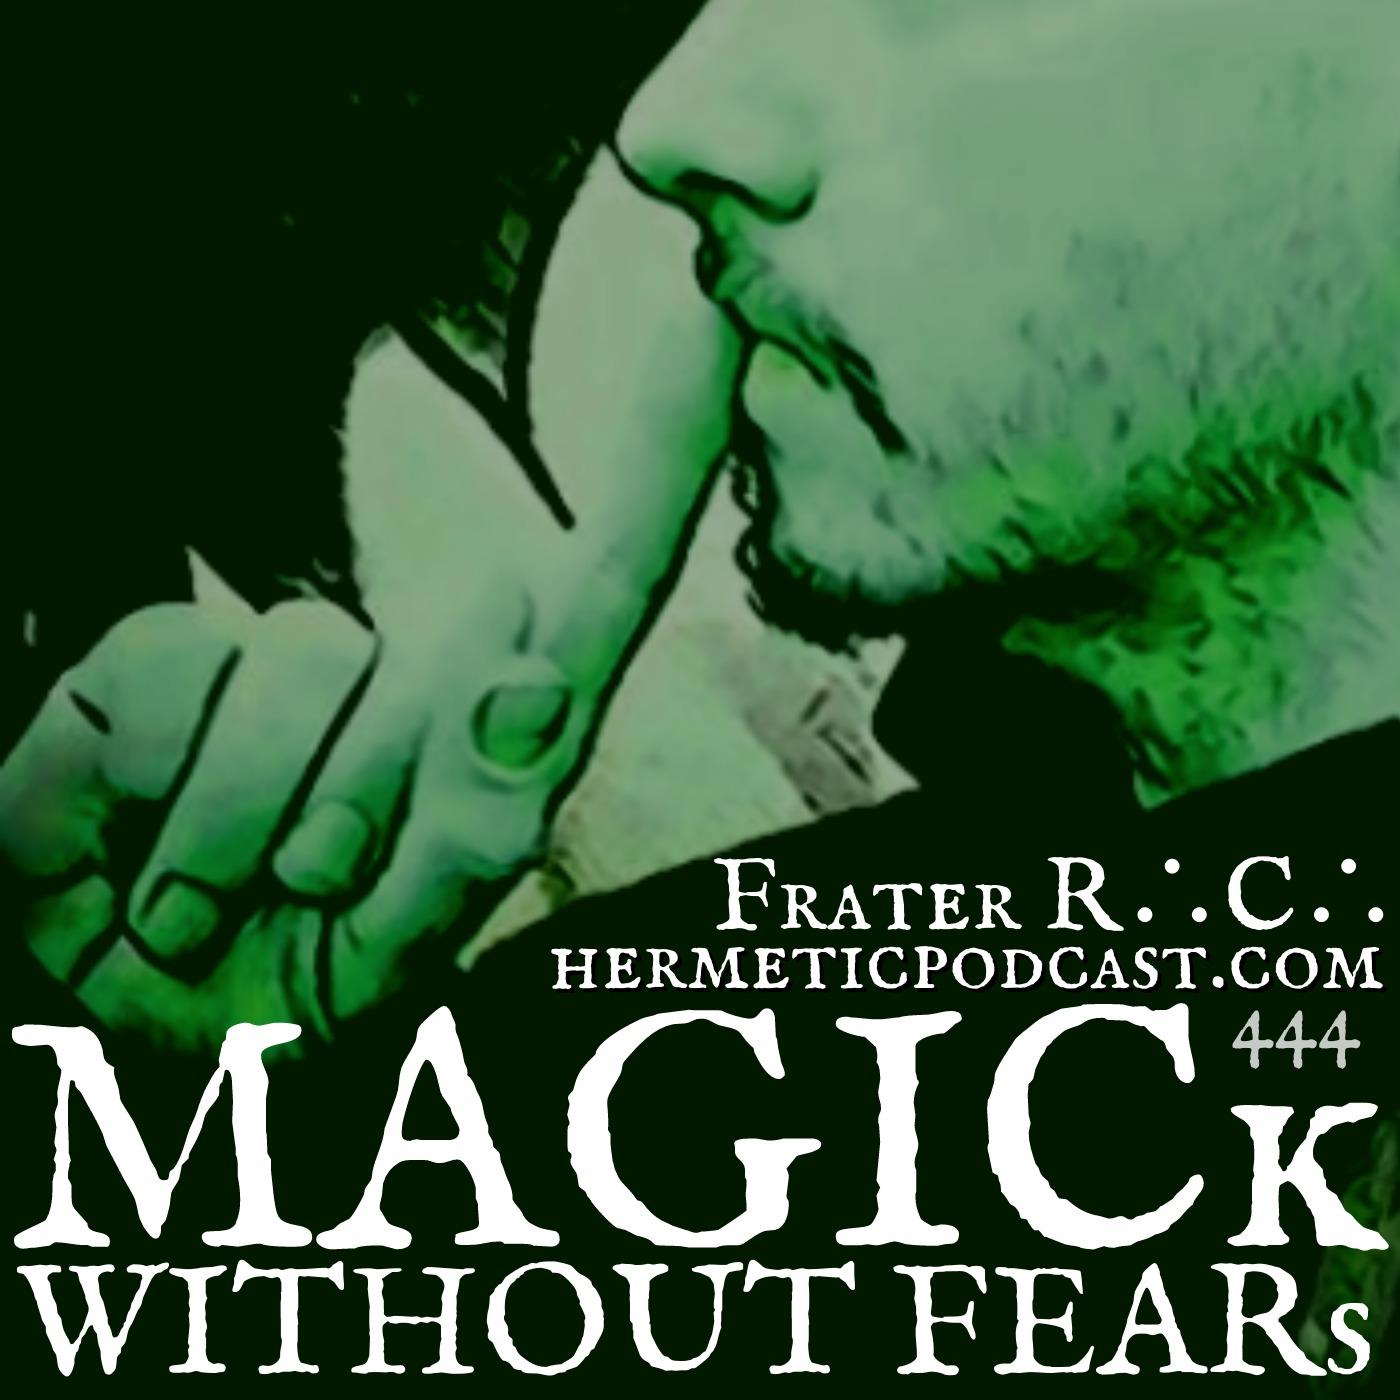 MAGICk WITHOUT FEARs "Hermetic Podcast" with Frater R∴C∴